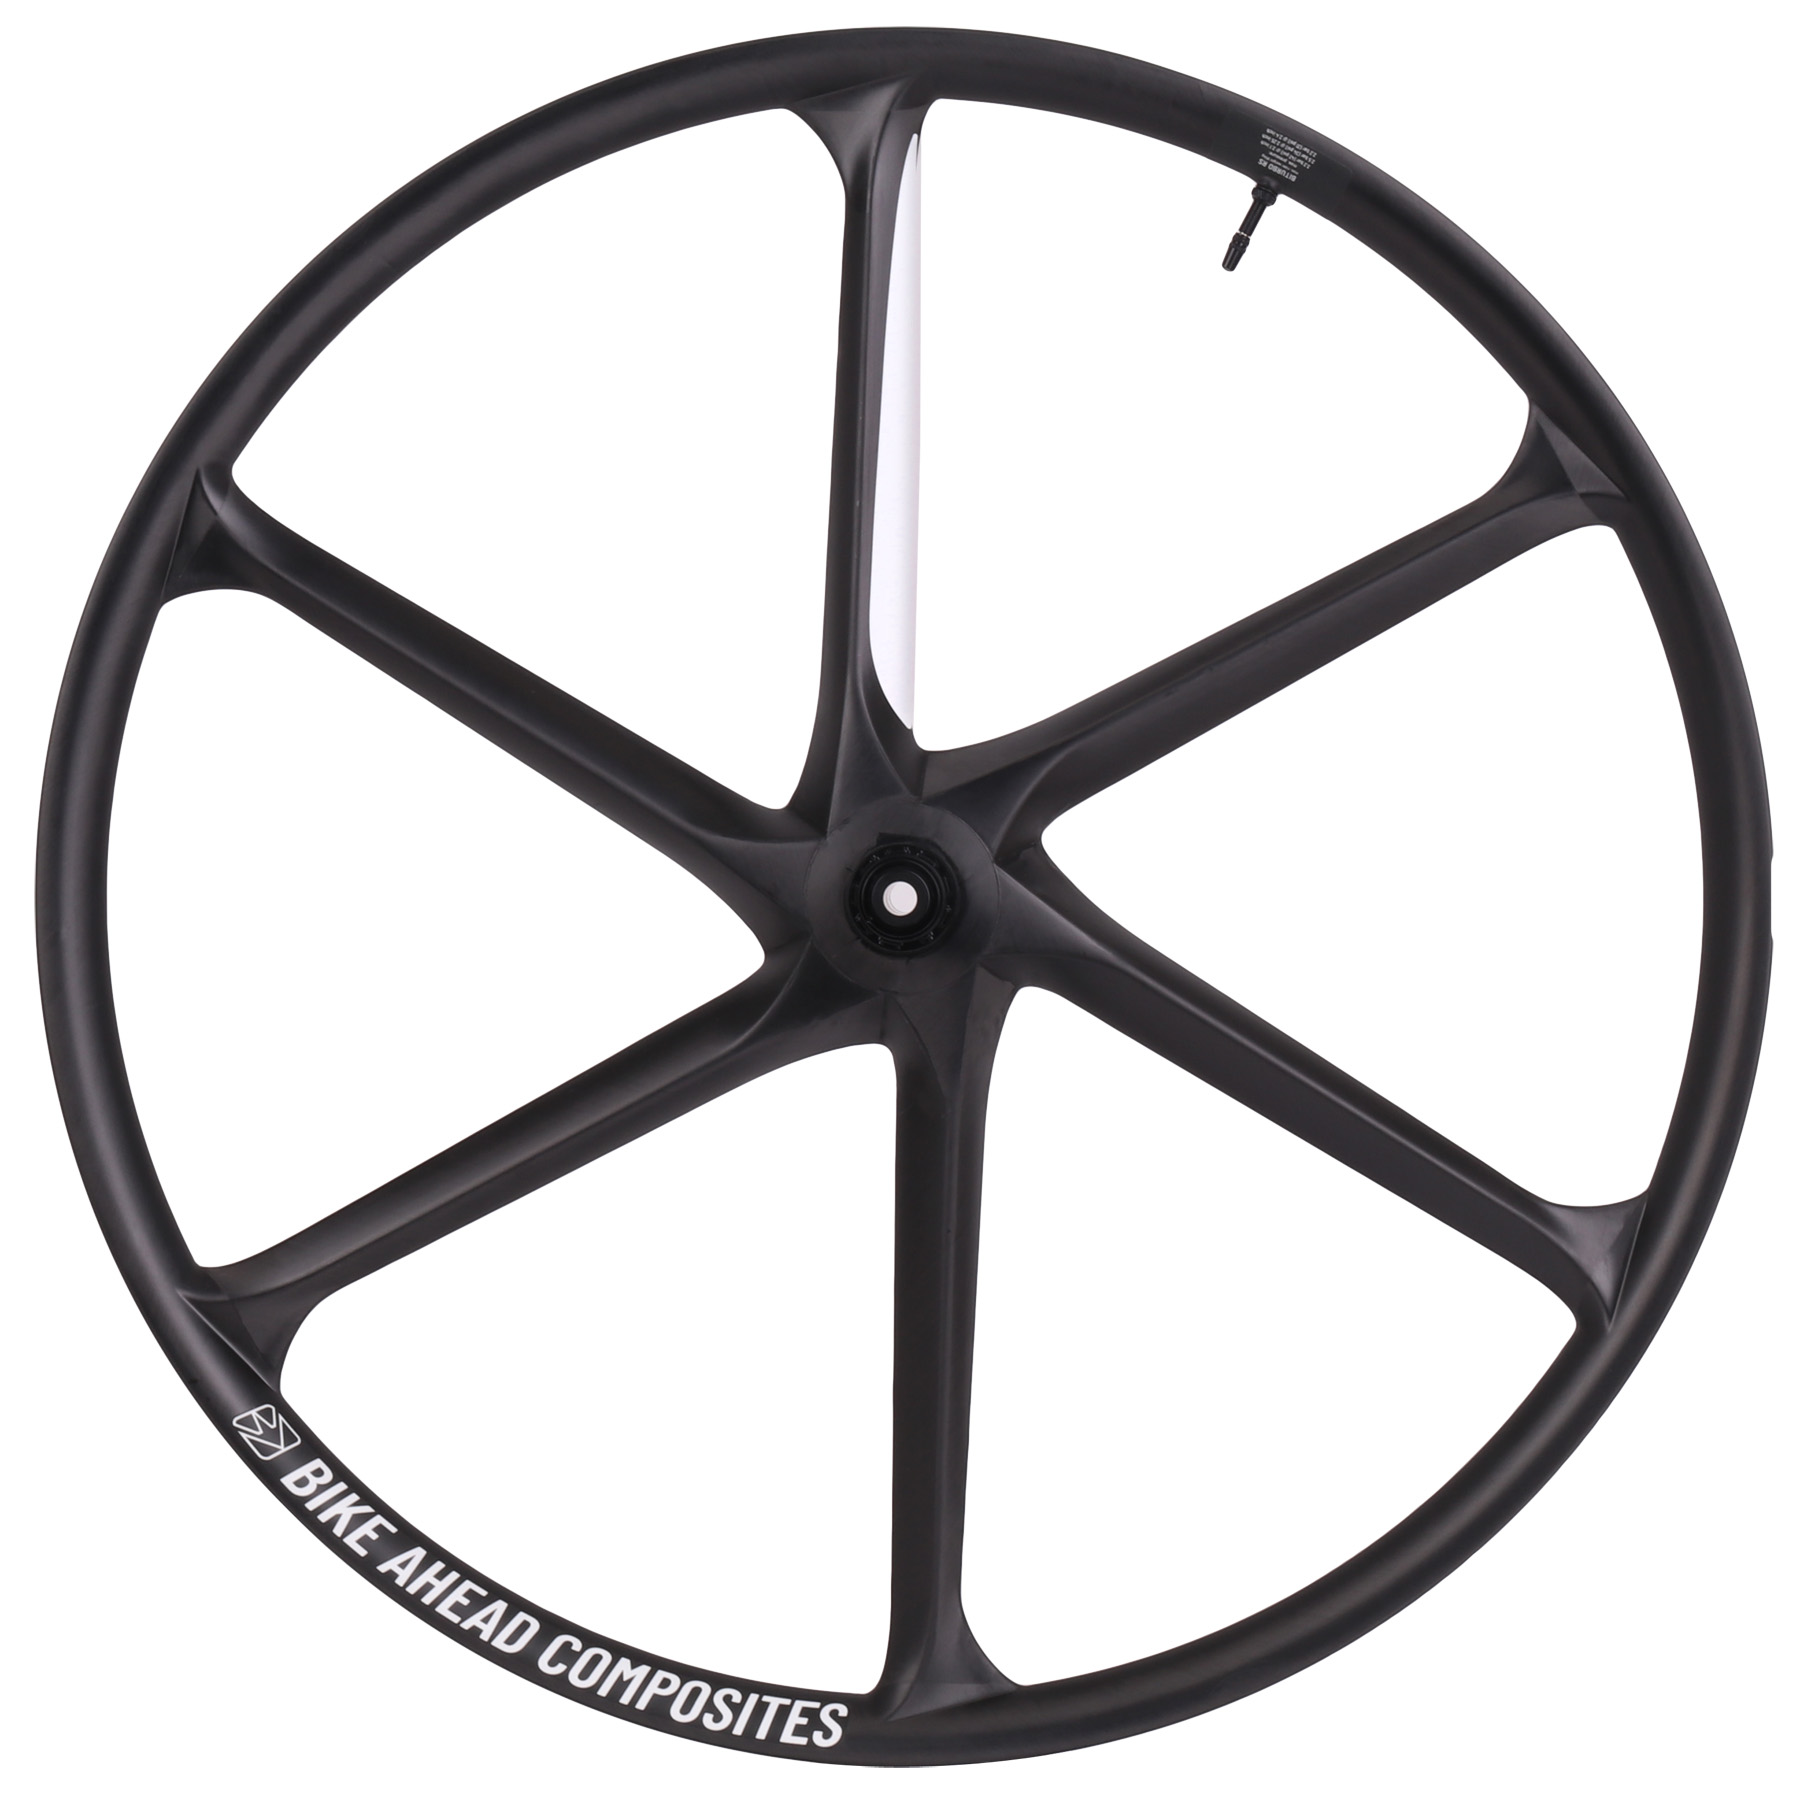 Picture of bike ahead composites BITURBO RS Carbon Rear Wheel - 6-Bolt - 12x148mm - SRAM XD